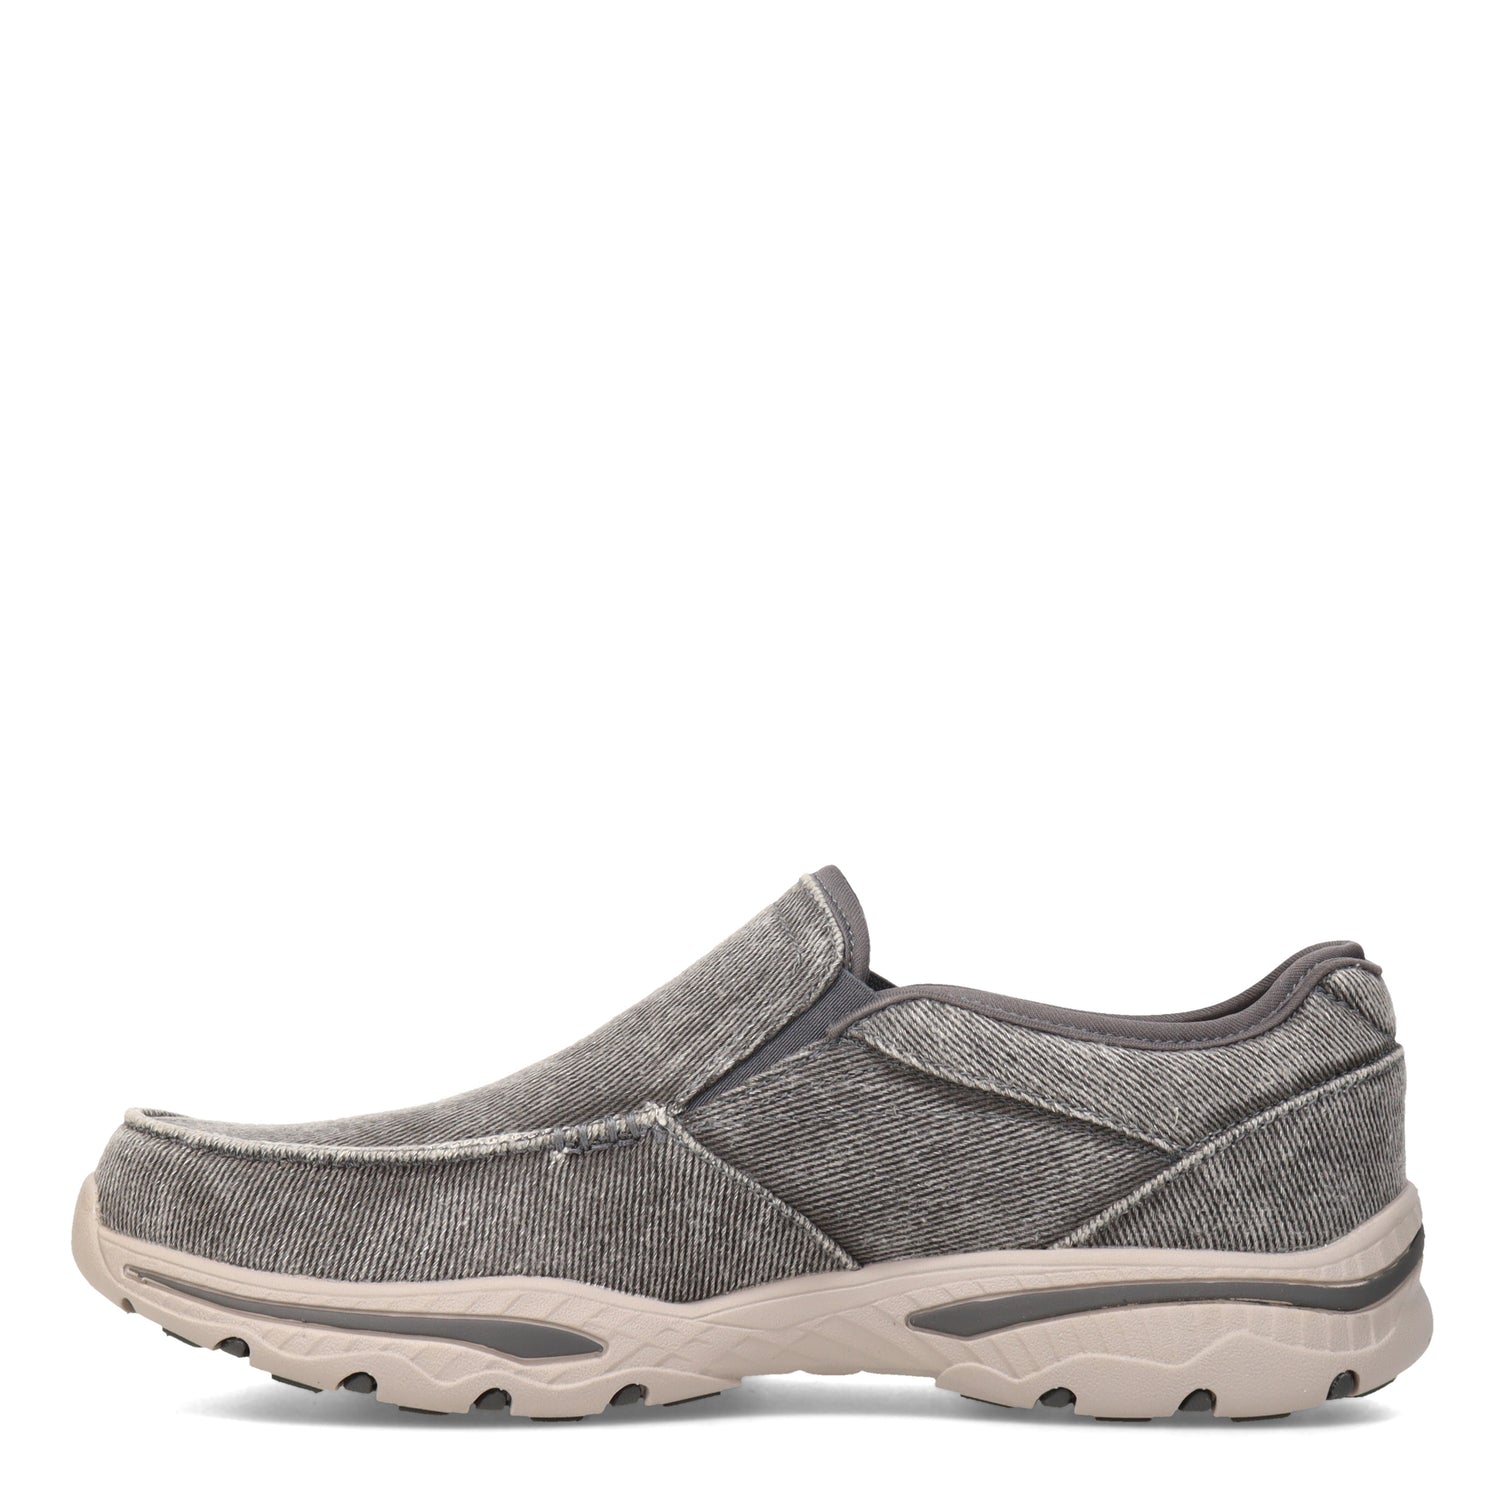 Peltz Shoes  Men's Skechers Relaxed Fit Creston Moseco Slip-On CHARCOAL 65355-CHAR